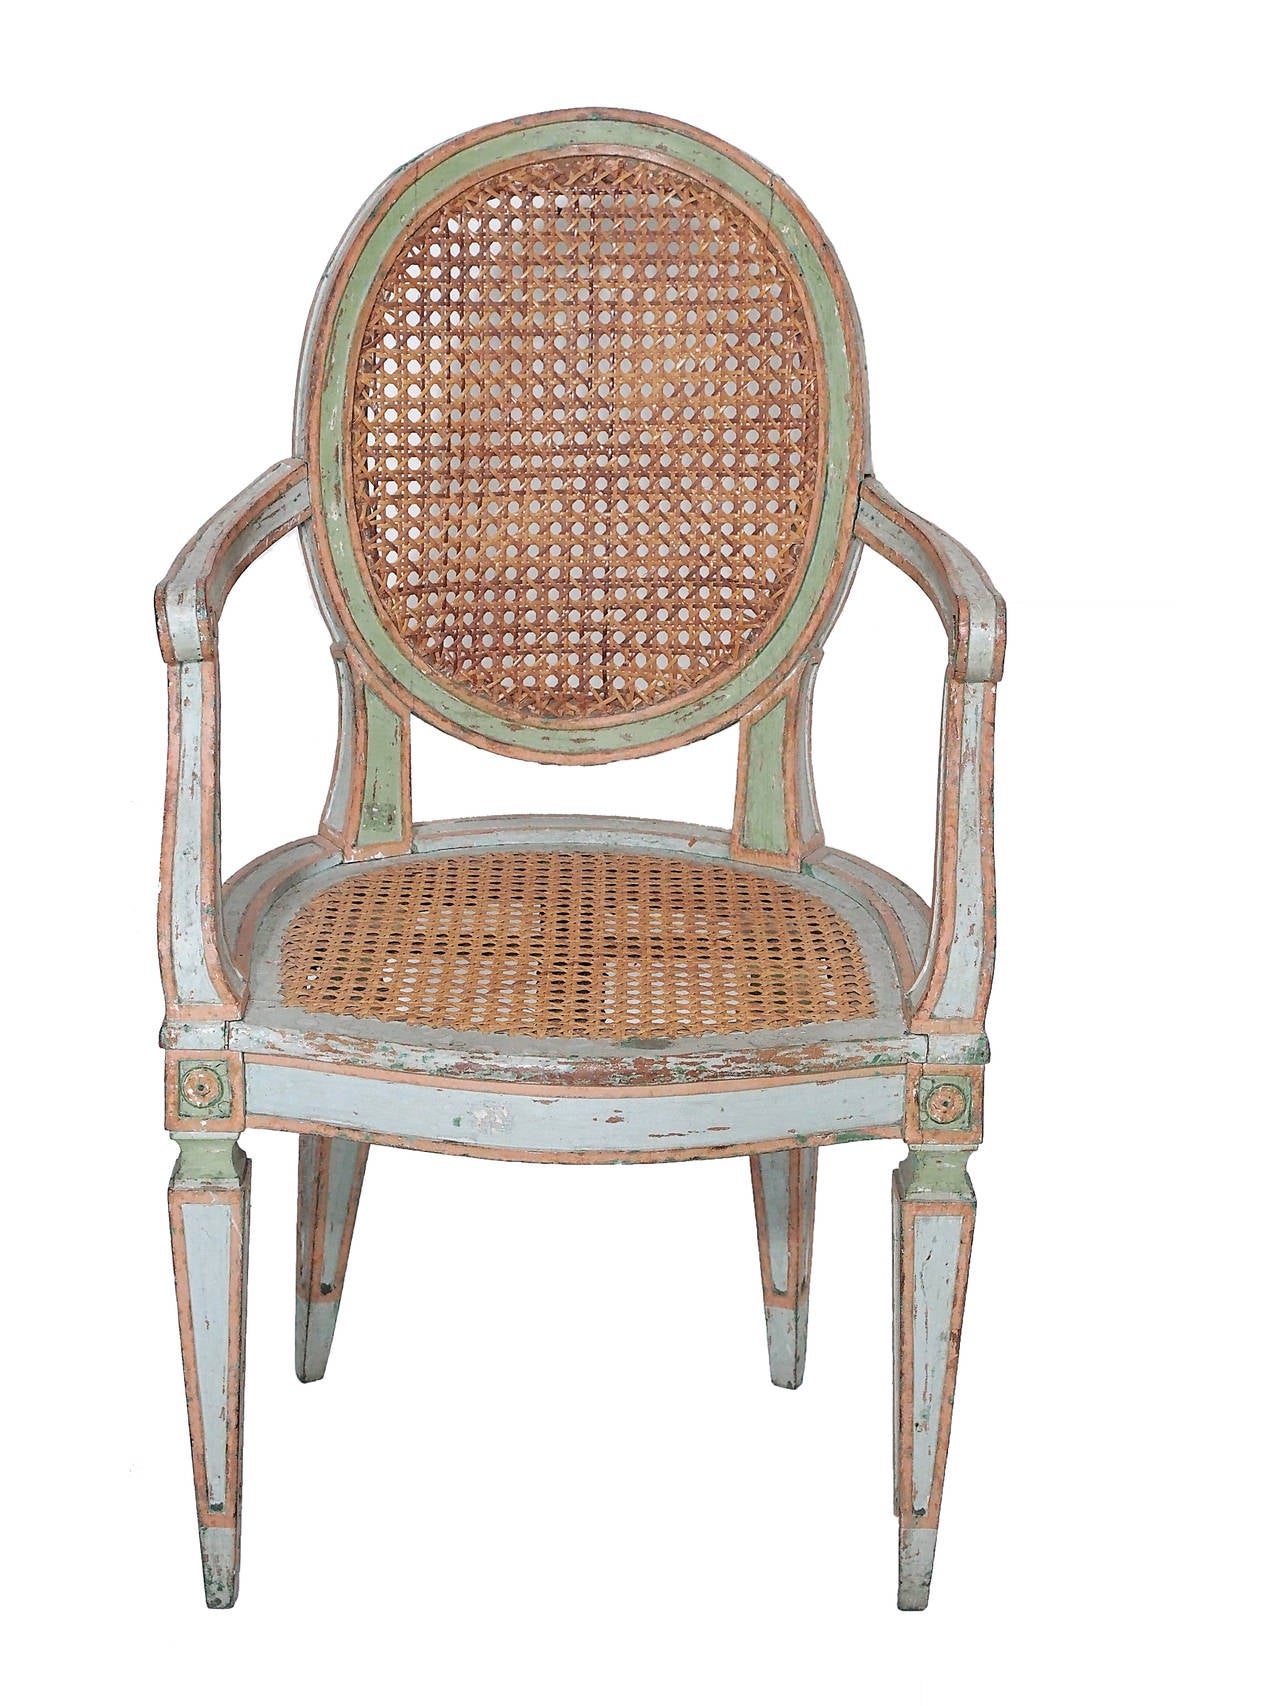 These antique caned Italian armchairs are beautifully proportioned with lovely painted finish and caned back and seats. These antique Louis XVI style Italian caned armchairs are a terrific addition as host chairs to a dining table or sitting